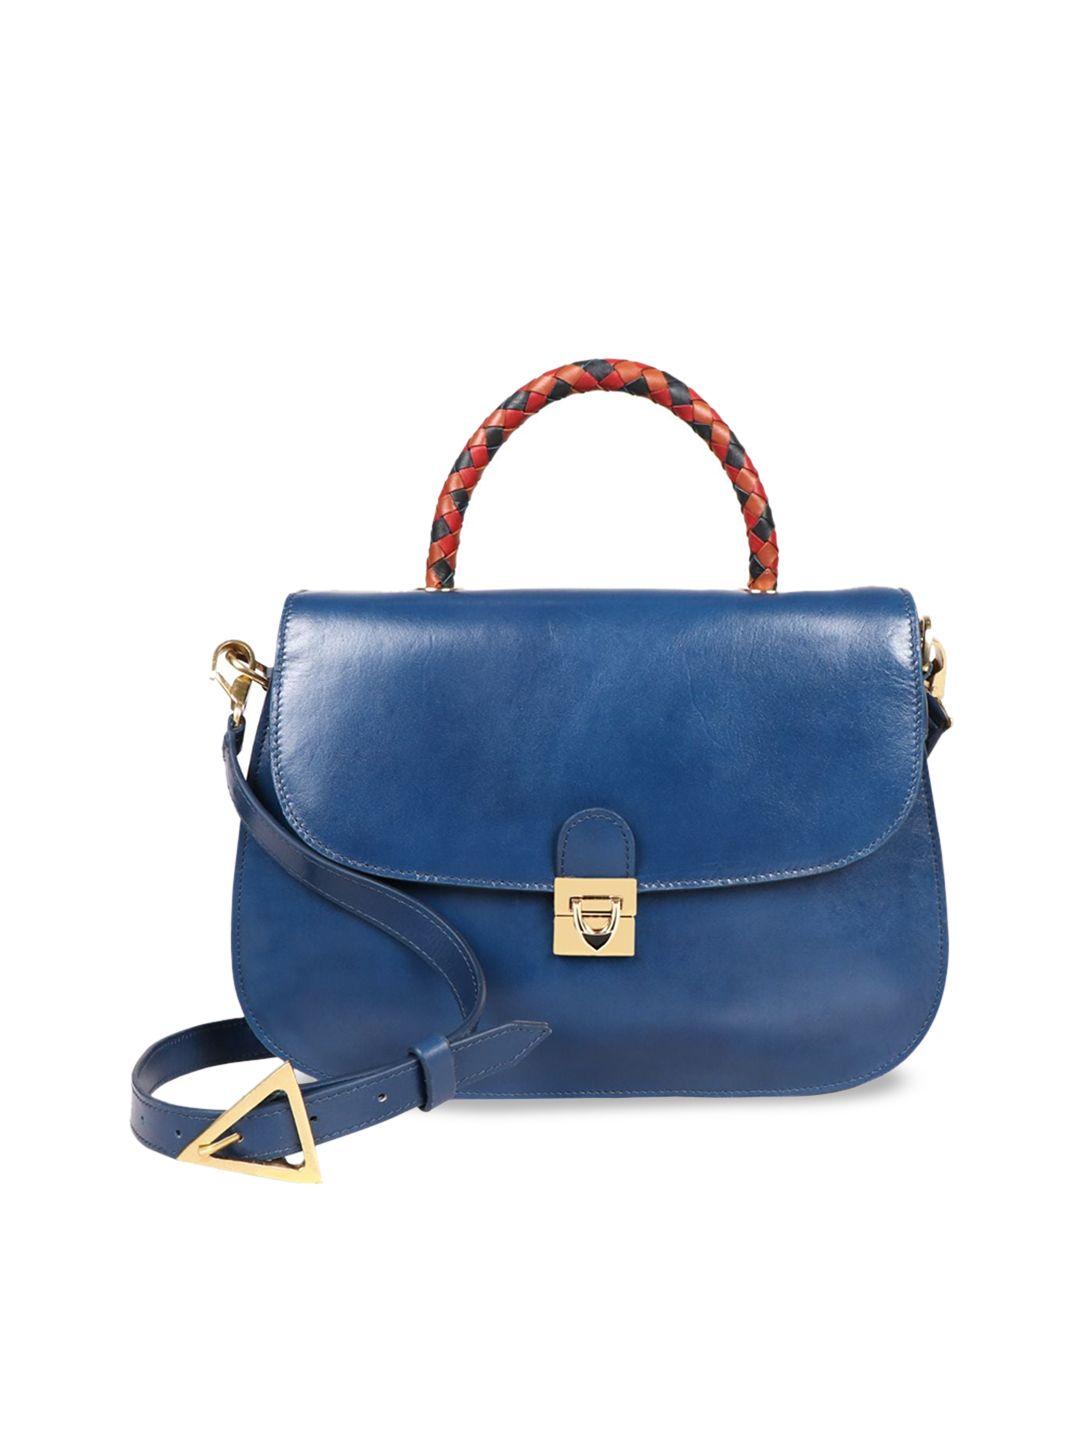 hidesign leather structured satchel